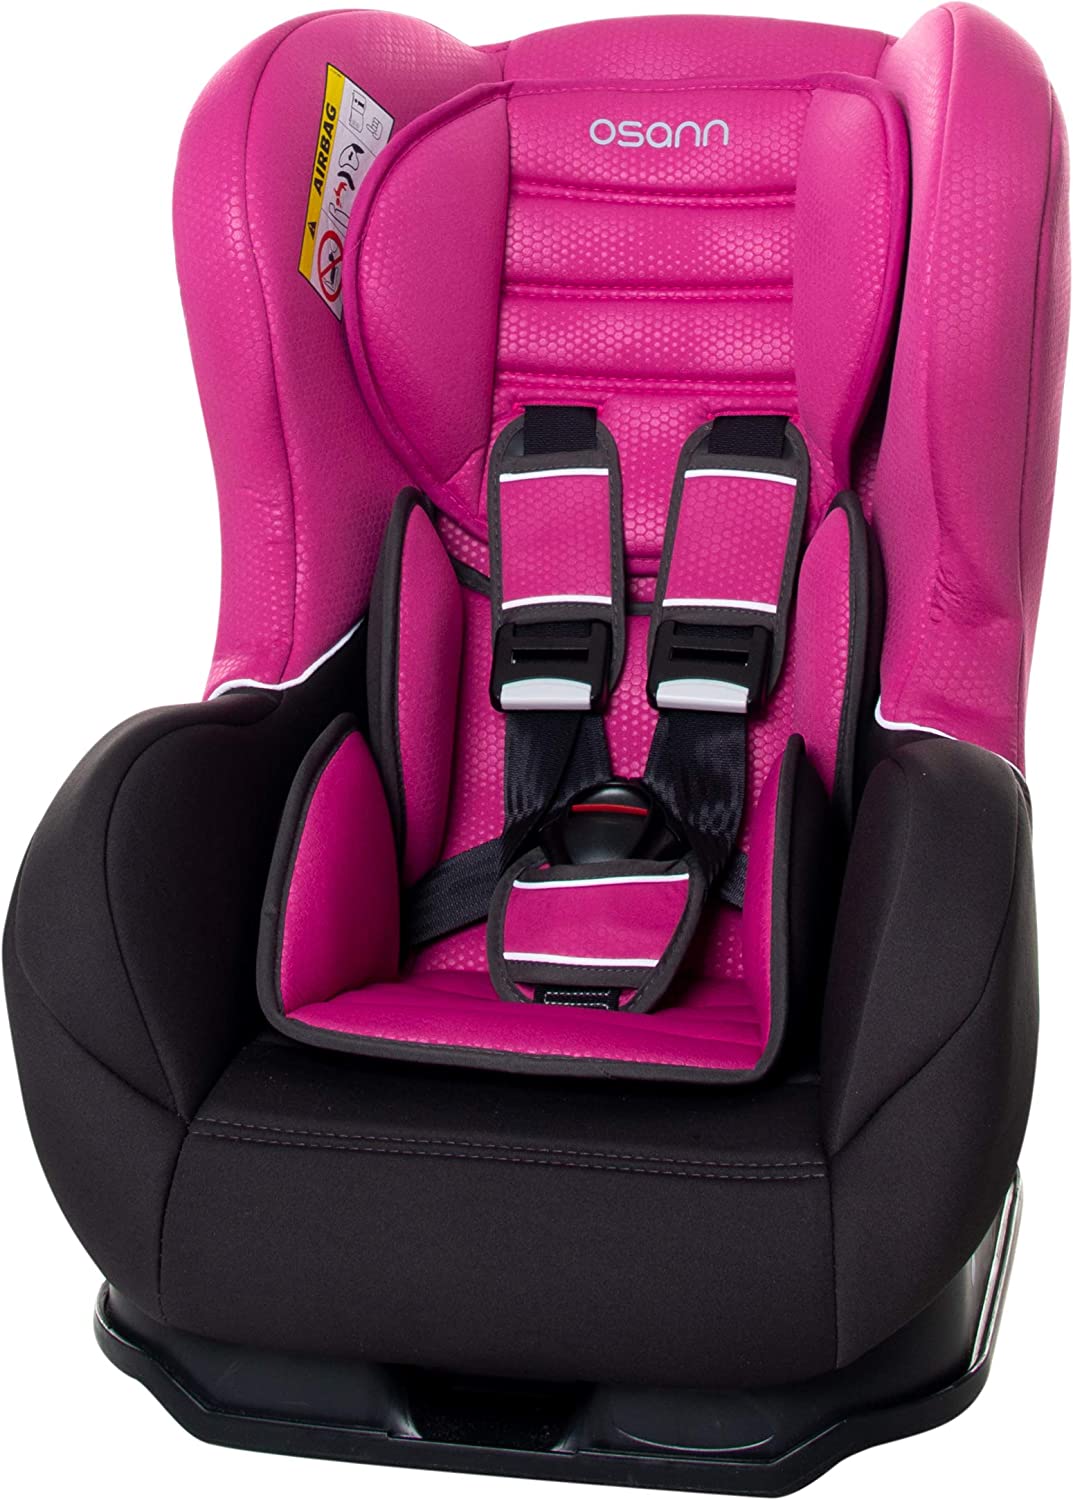 Osann Cosmo SP Child Car Seat Group 0+/1 (up to 18 kg) Pink